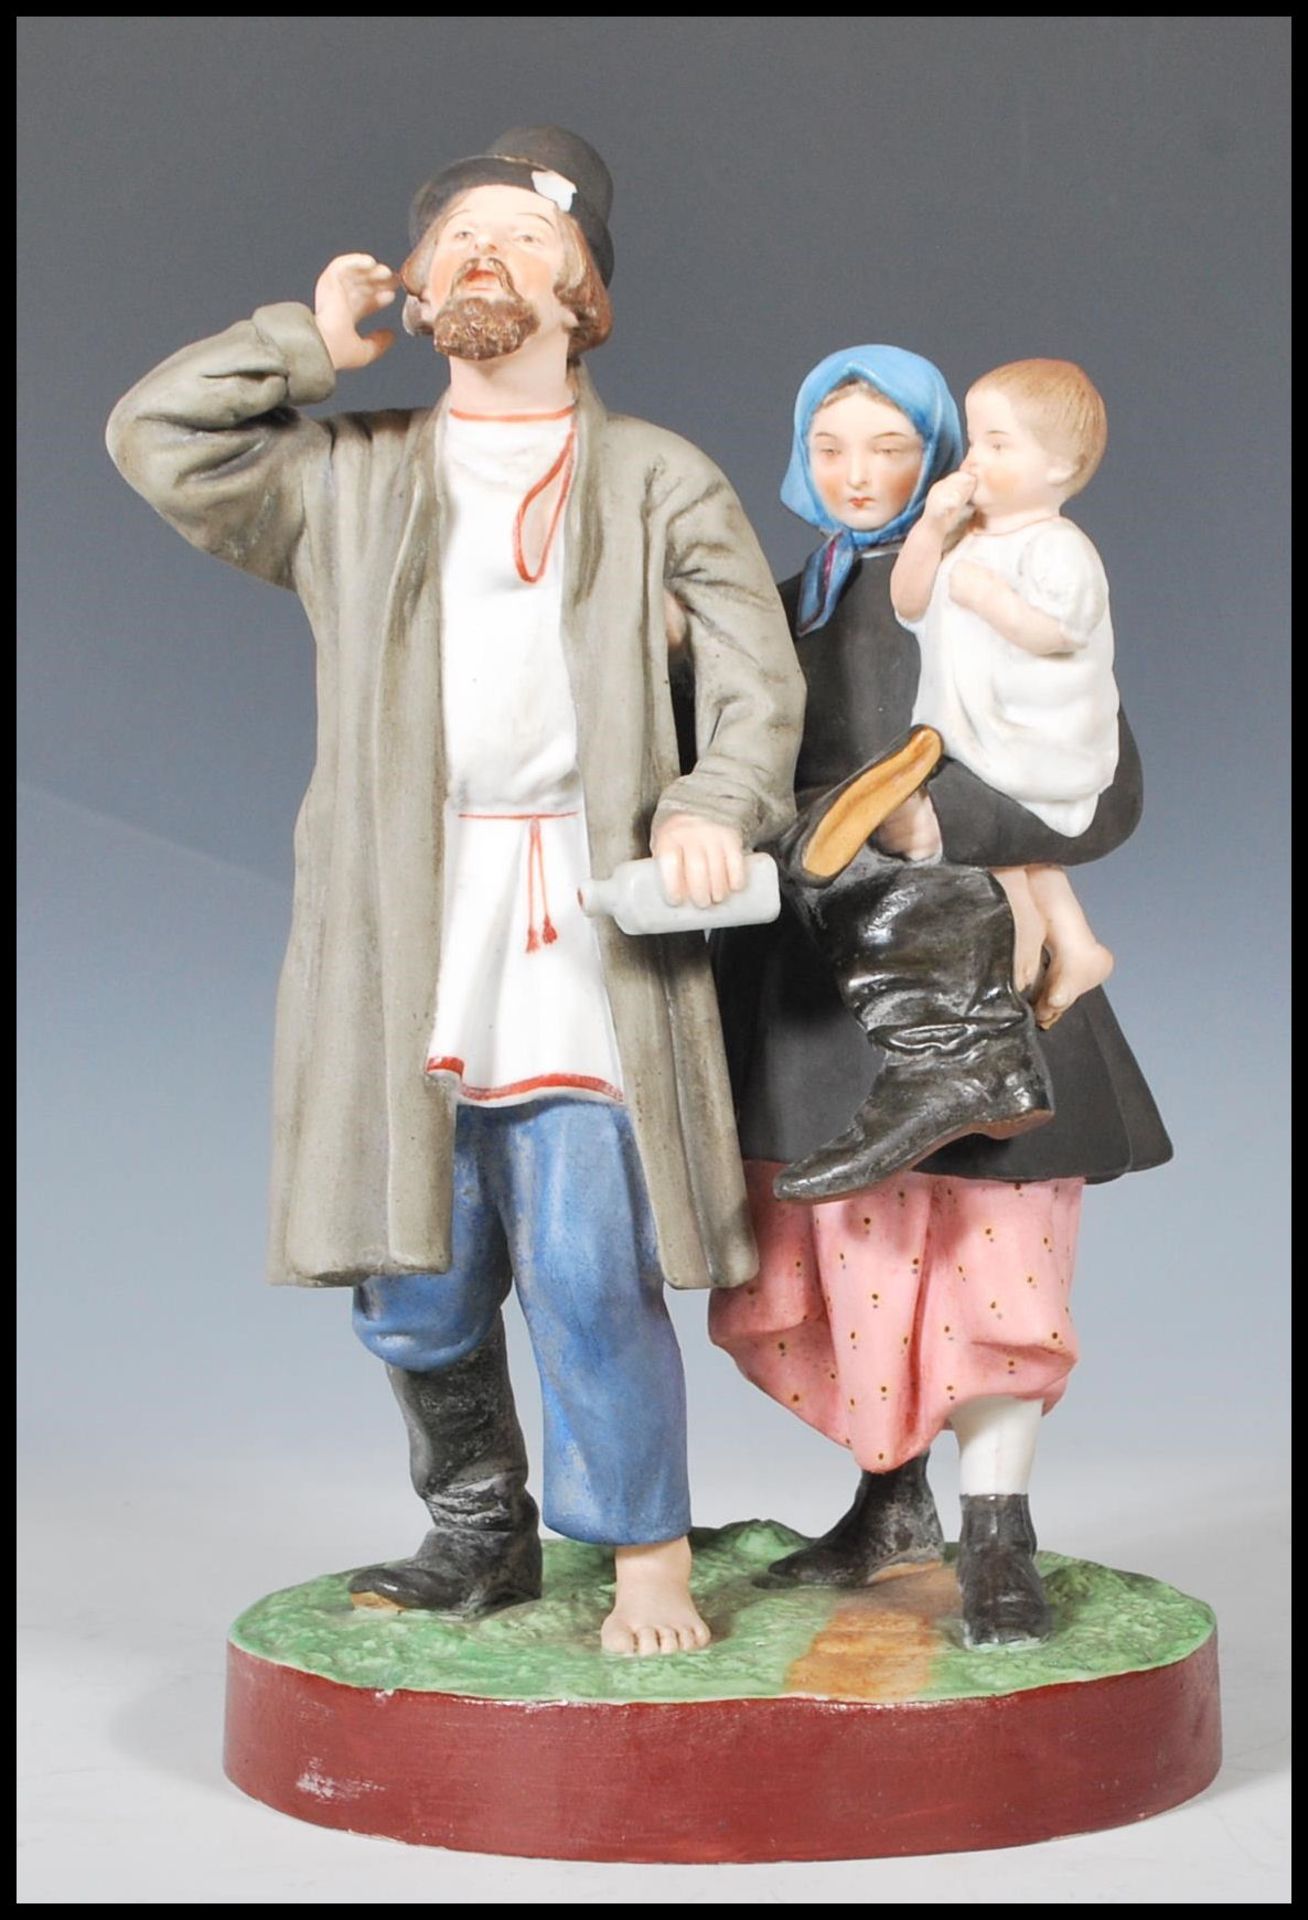 A 19th Century Russian Gardner bisque figurine group depicting a man with one boot and a bottle in